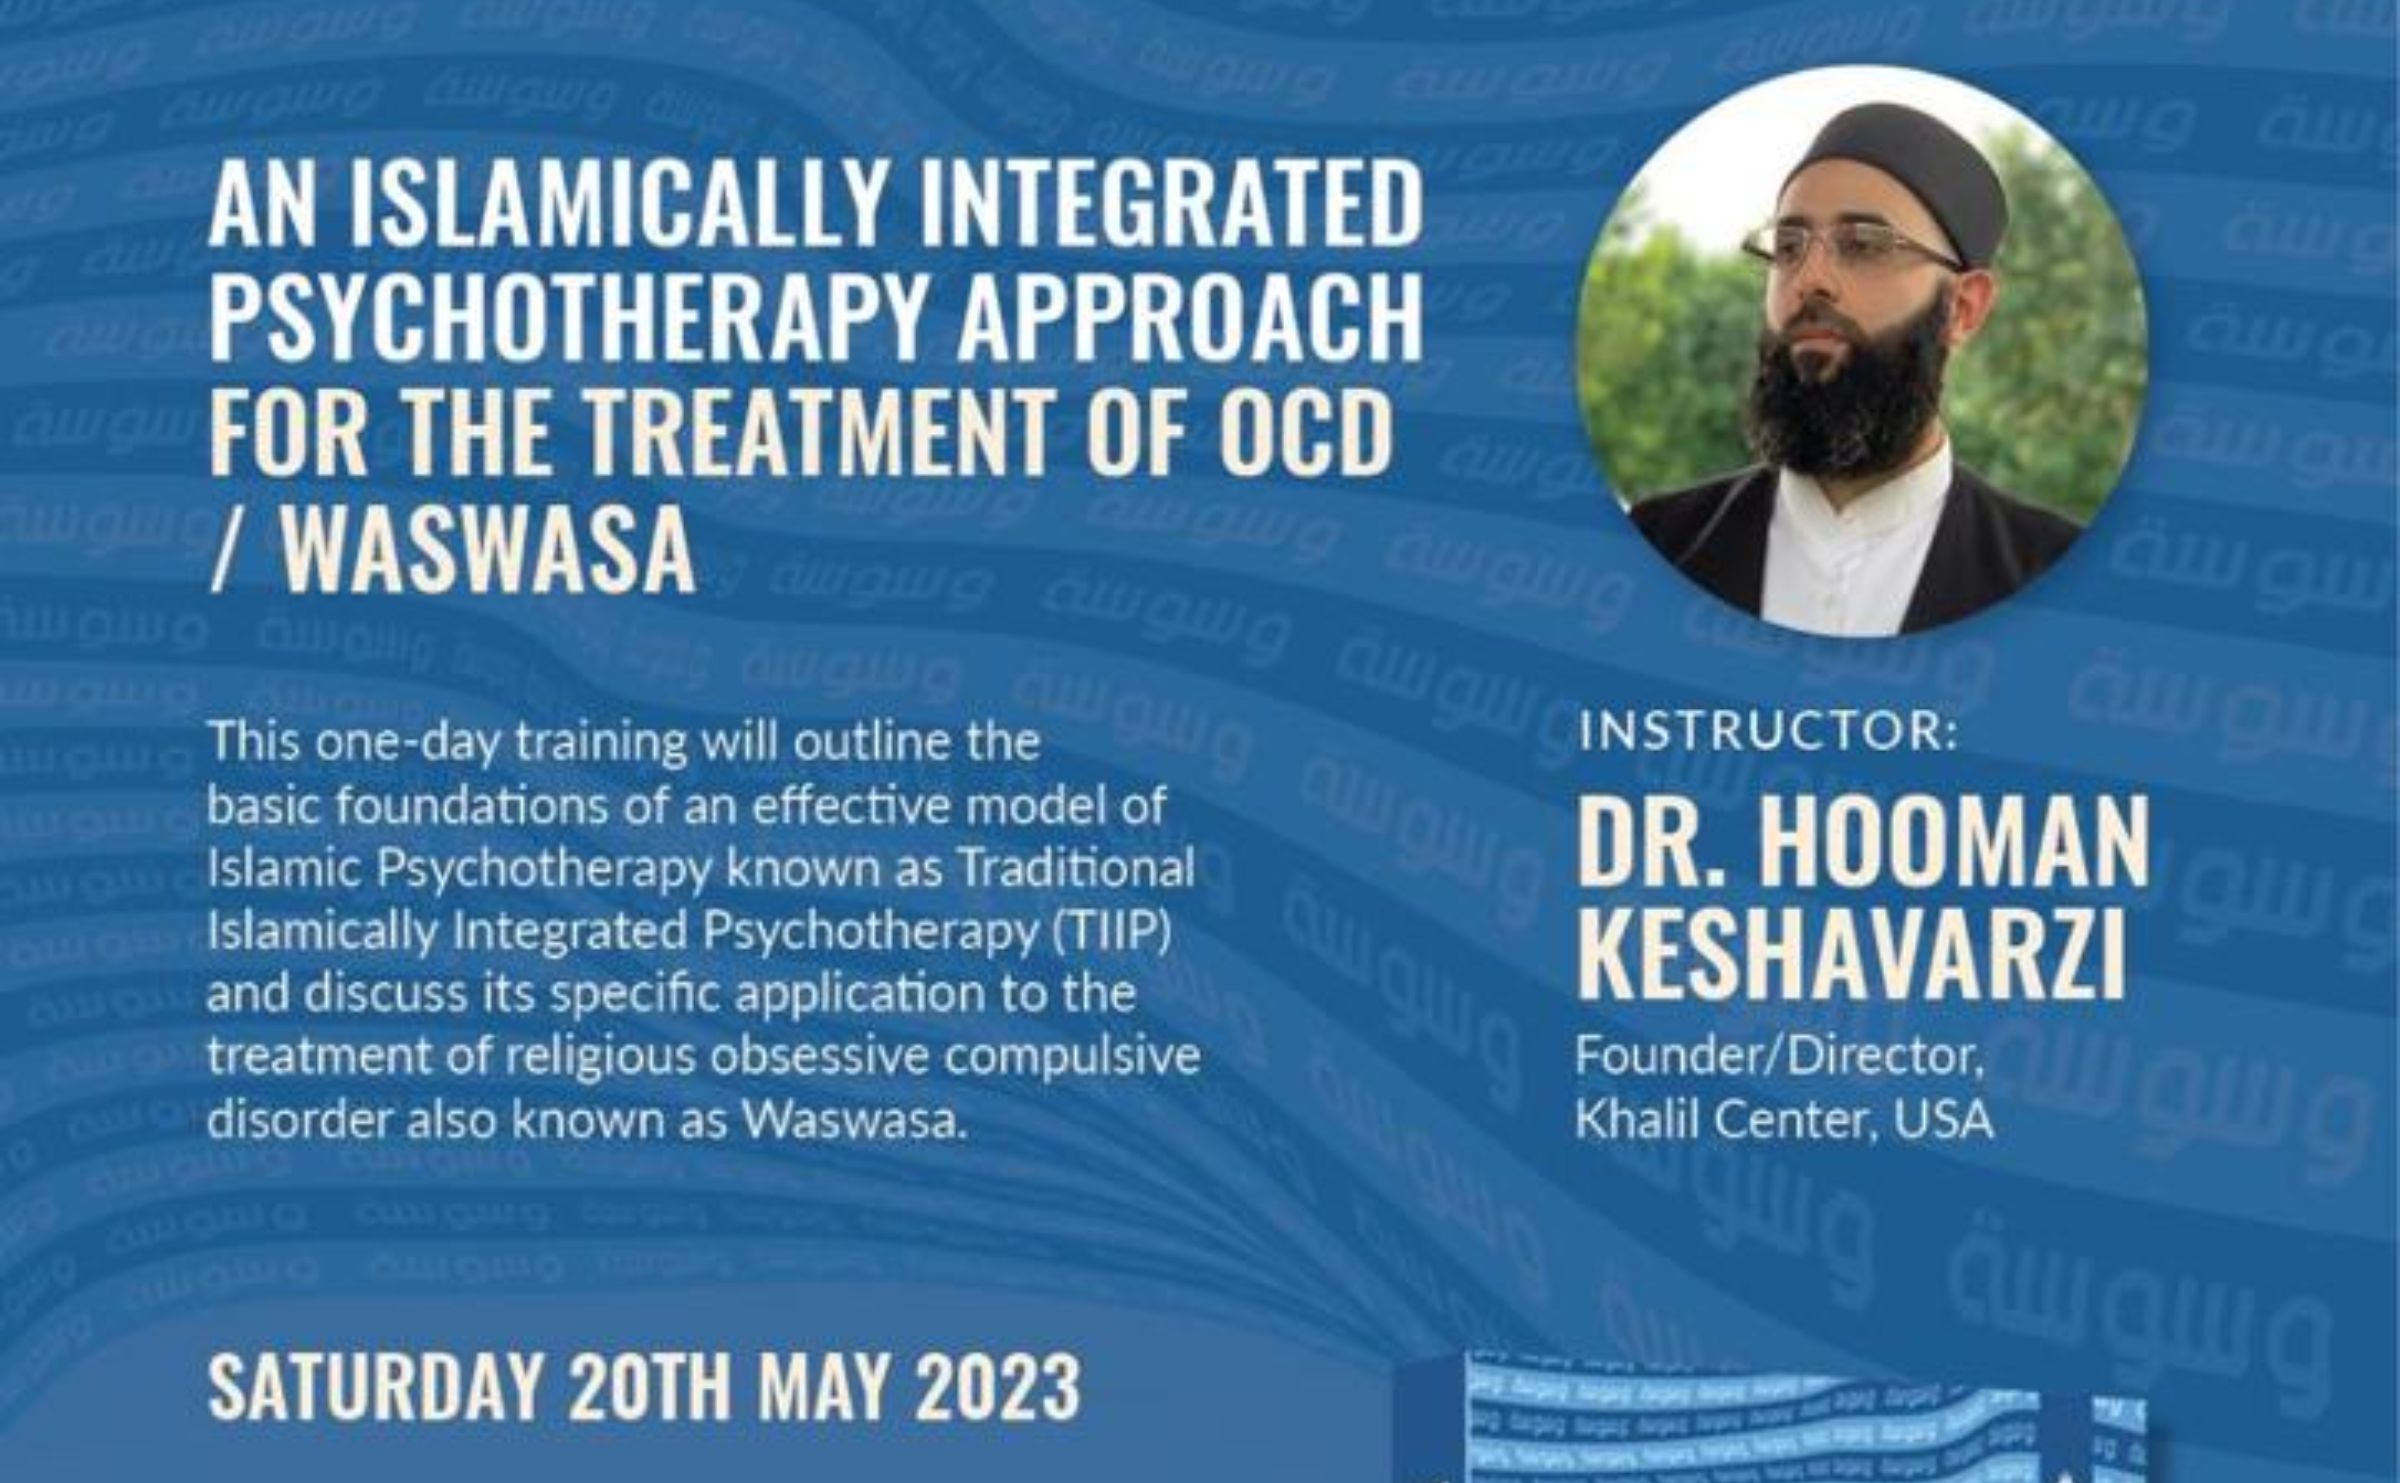 An Islamically Integrated Psychotherapy Approach For The Treatment Of OCD/ Waswasa